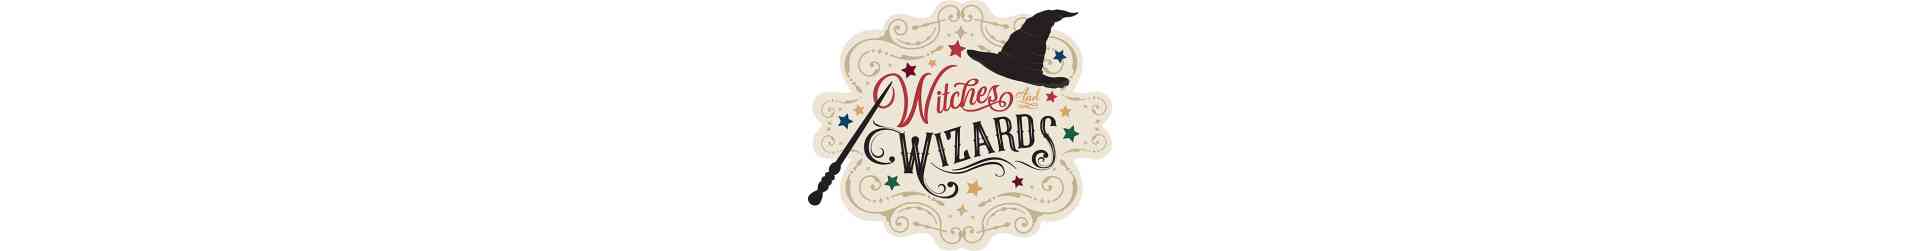 WITCHES & WIZARDS